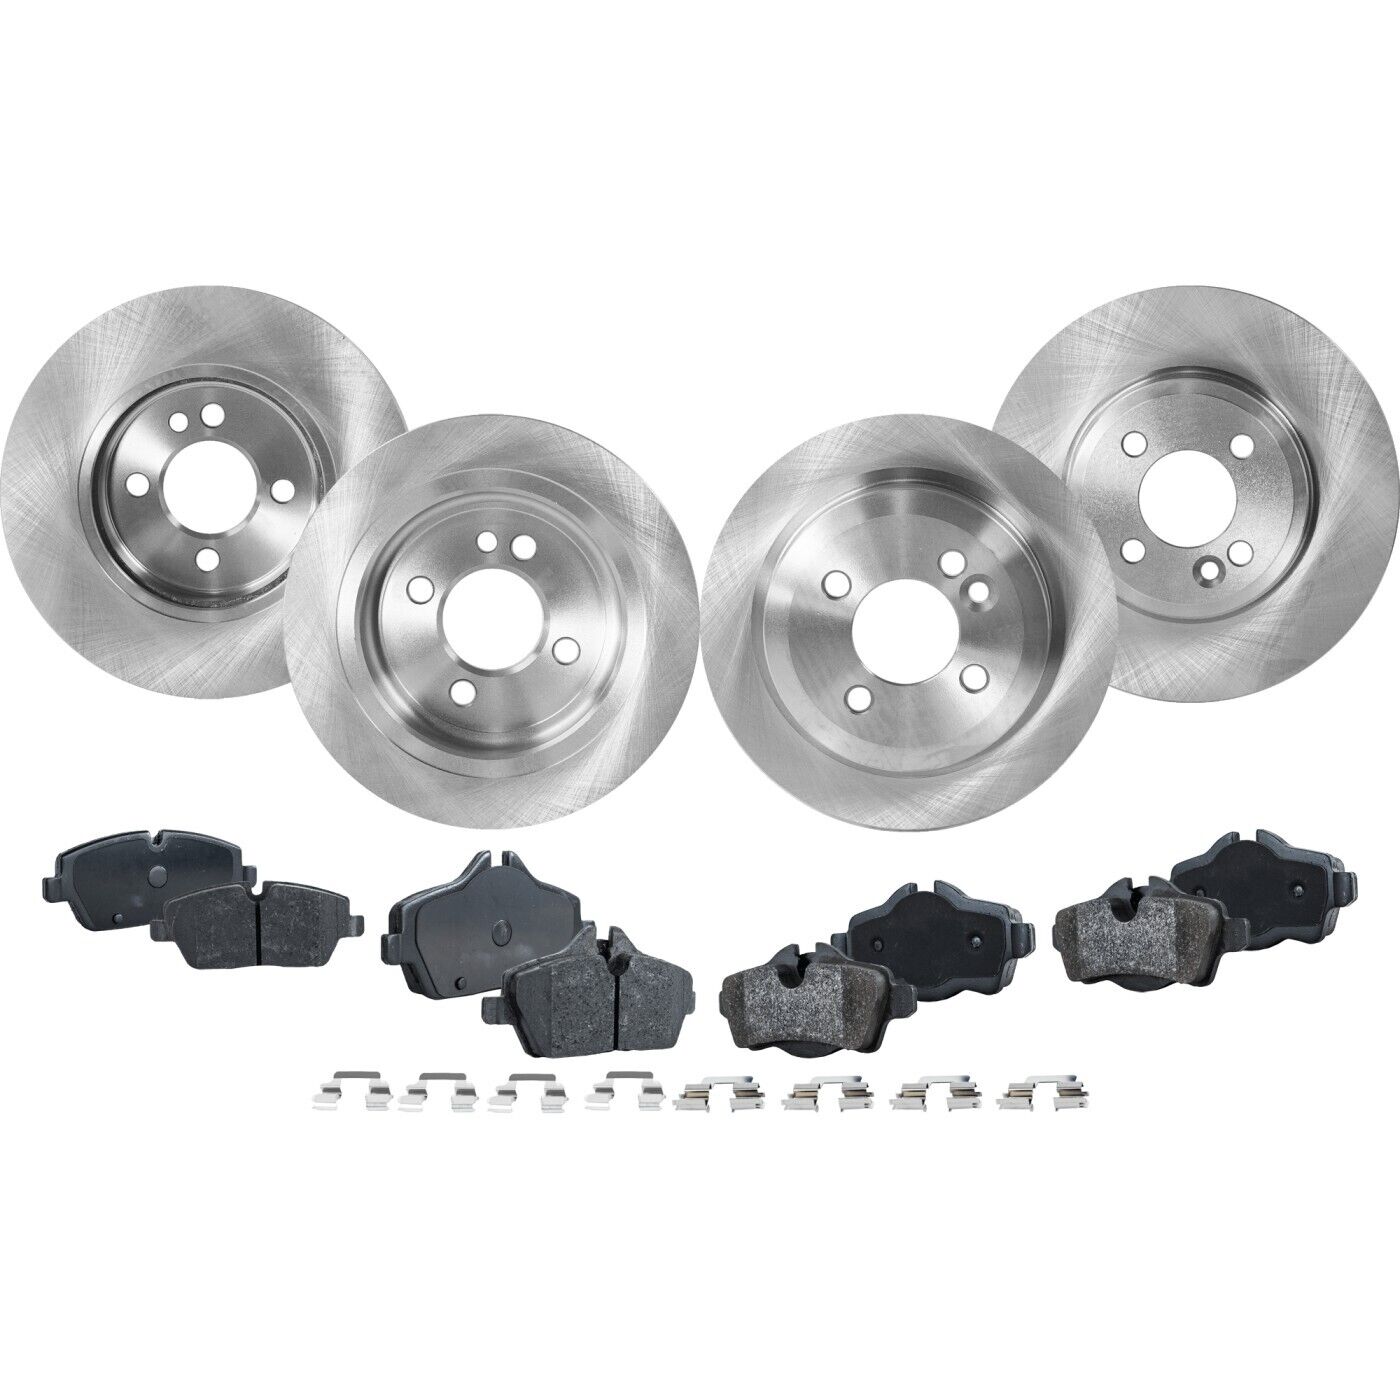 Front & Rear Brake Disc Rotors and Pads Kit For Mini Cooper 2007 2008 2009-2015